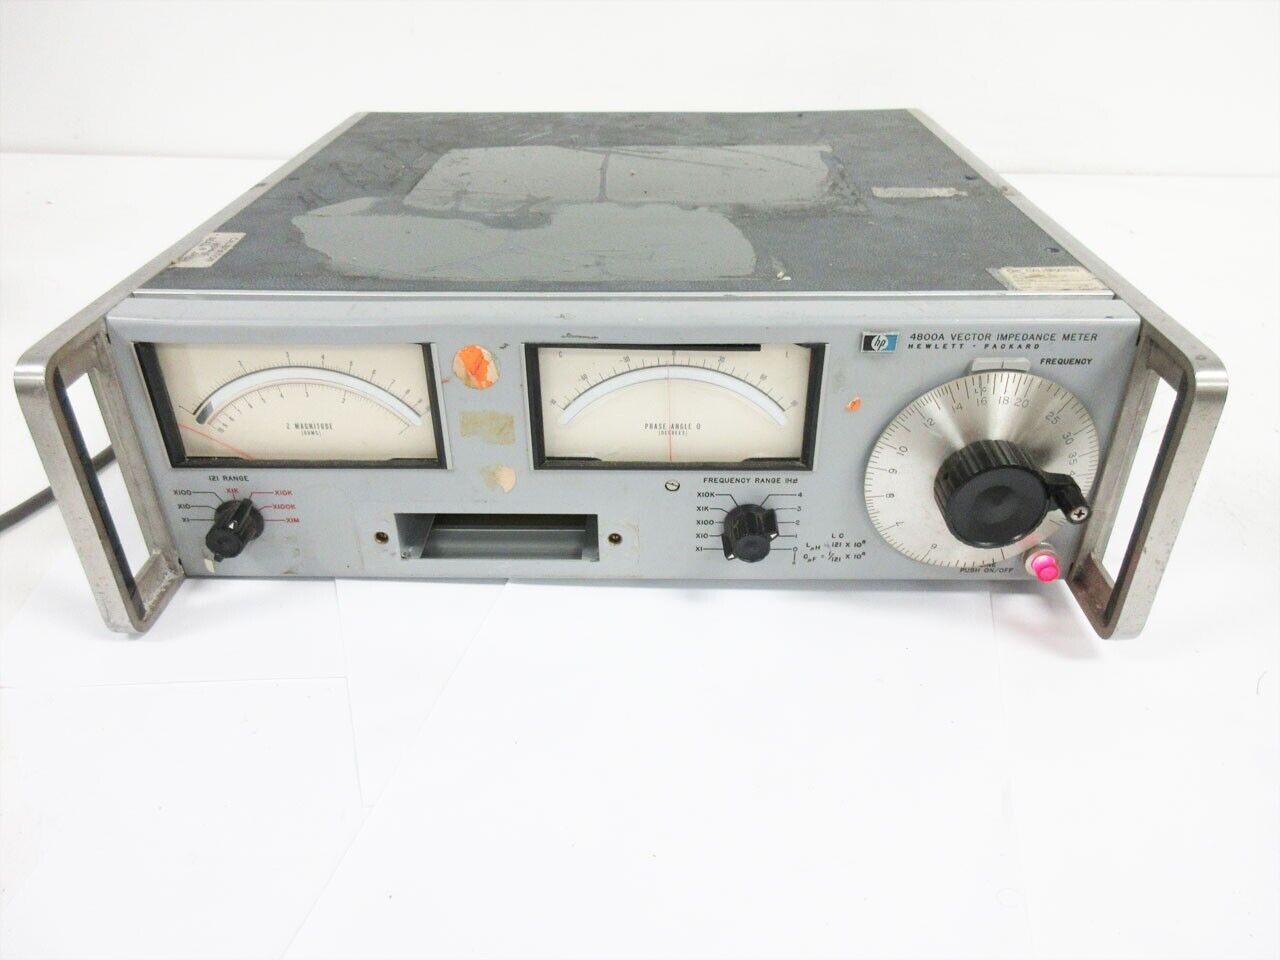 HP 4800A VECTOR IMPEDANCE METER - PARTS ONLY